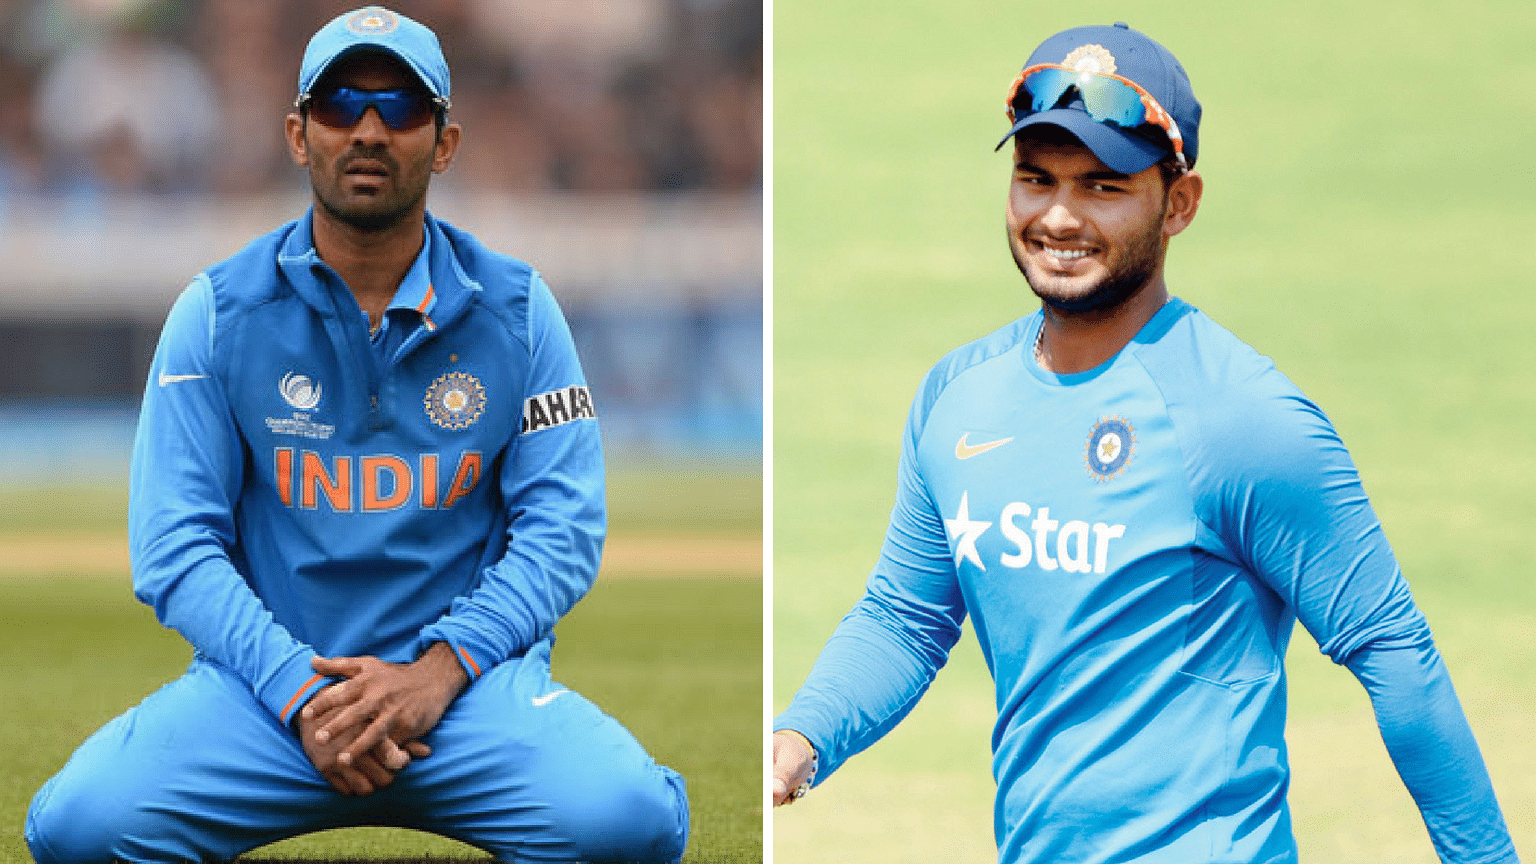 File pictures of Dinesh Karthik (left) and Rishabh Pant.